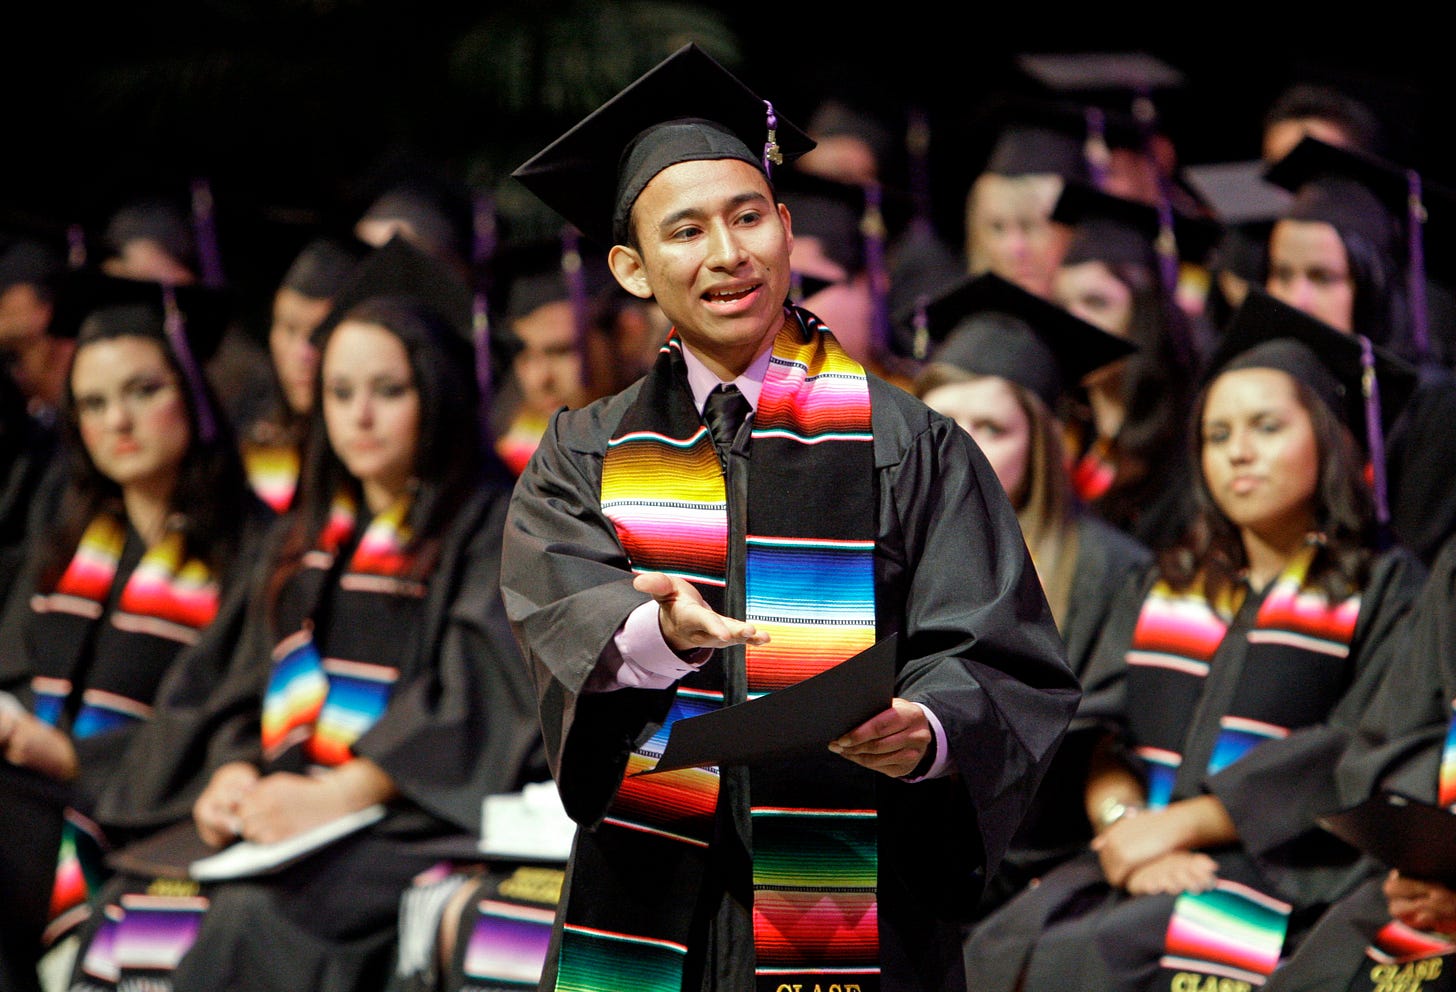 Latinos need a voice in the U.S. education debate